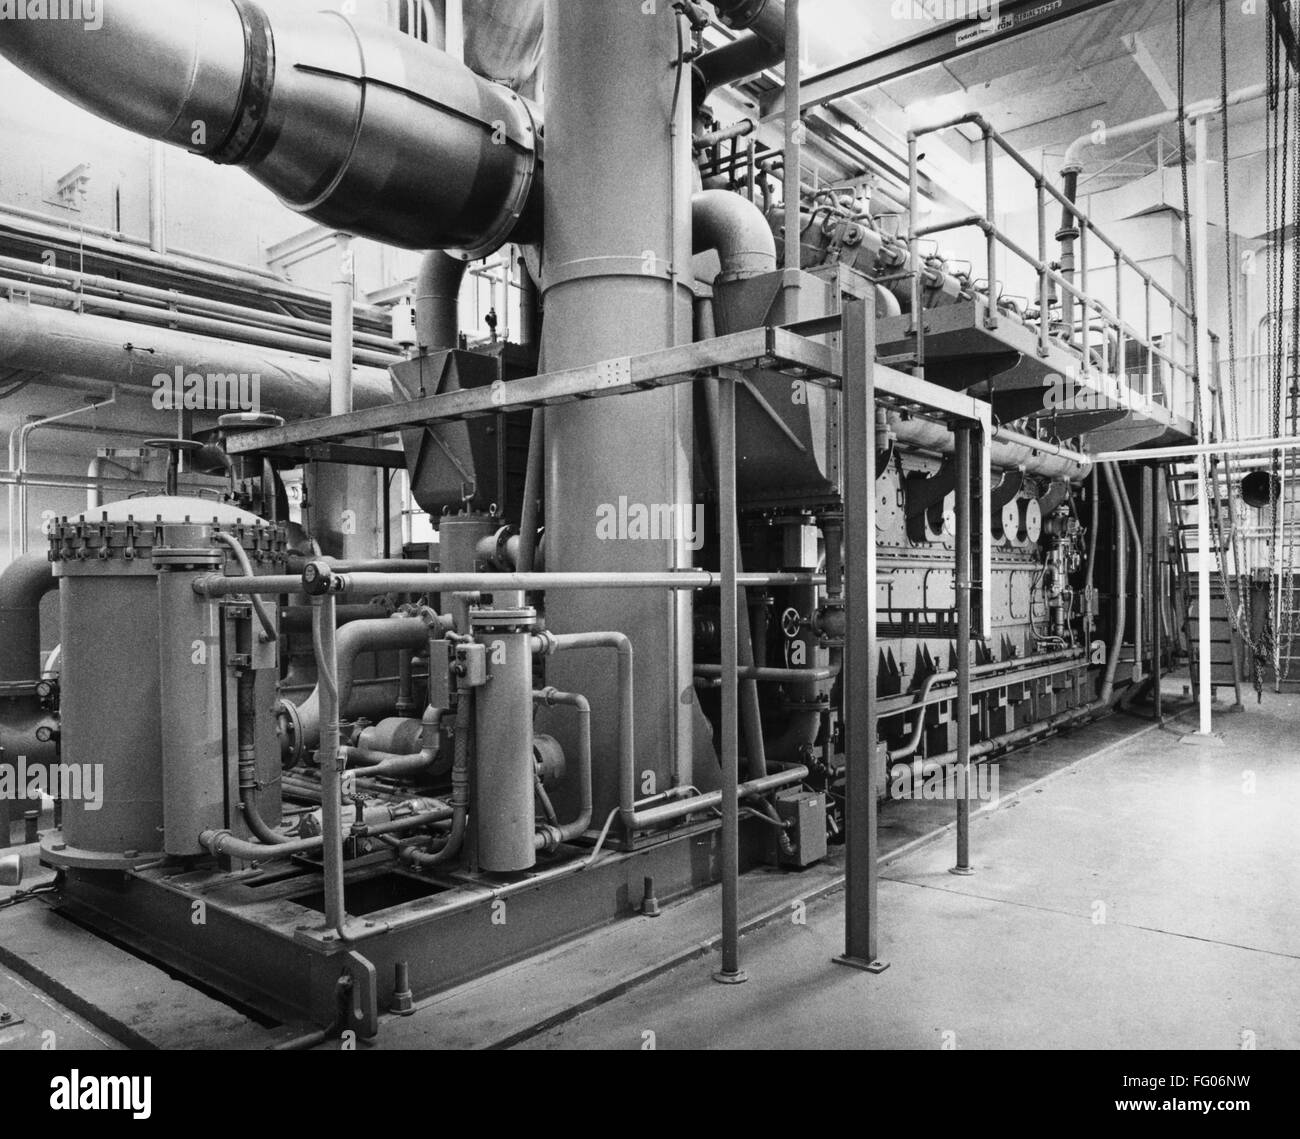 NUCLEAR POWER PLANT, 1974. /nAuxiliary equipment with standby diesel ...